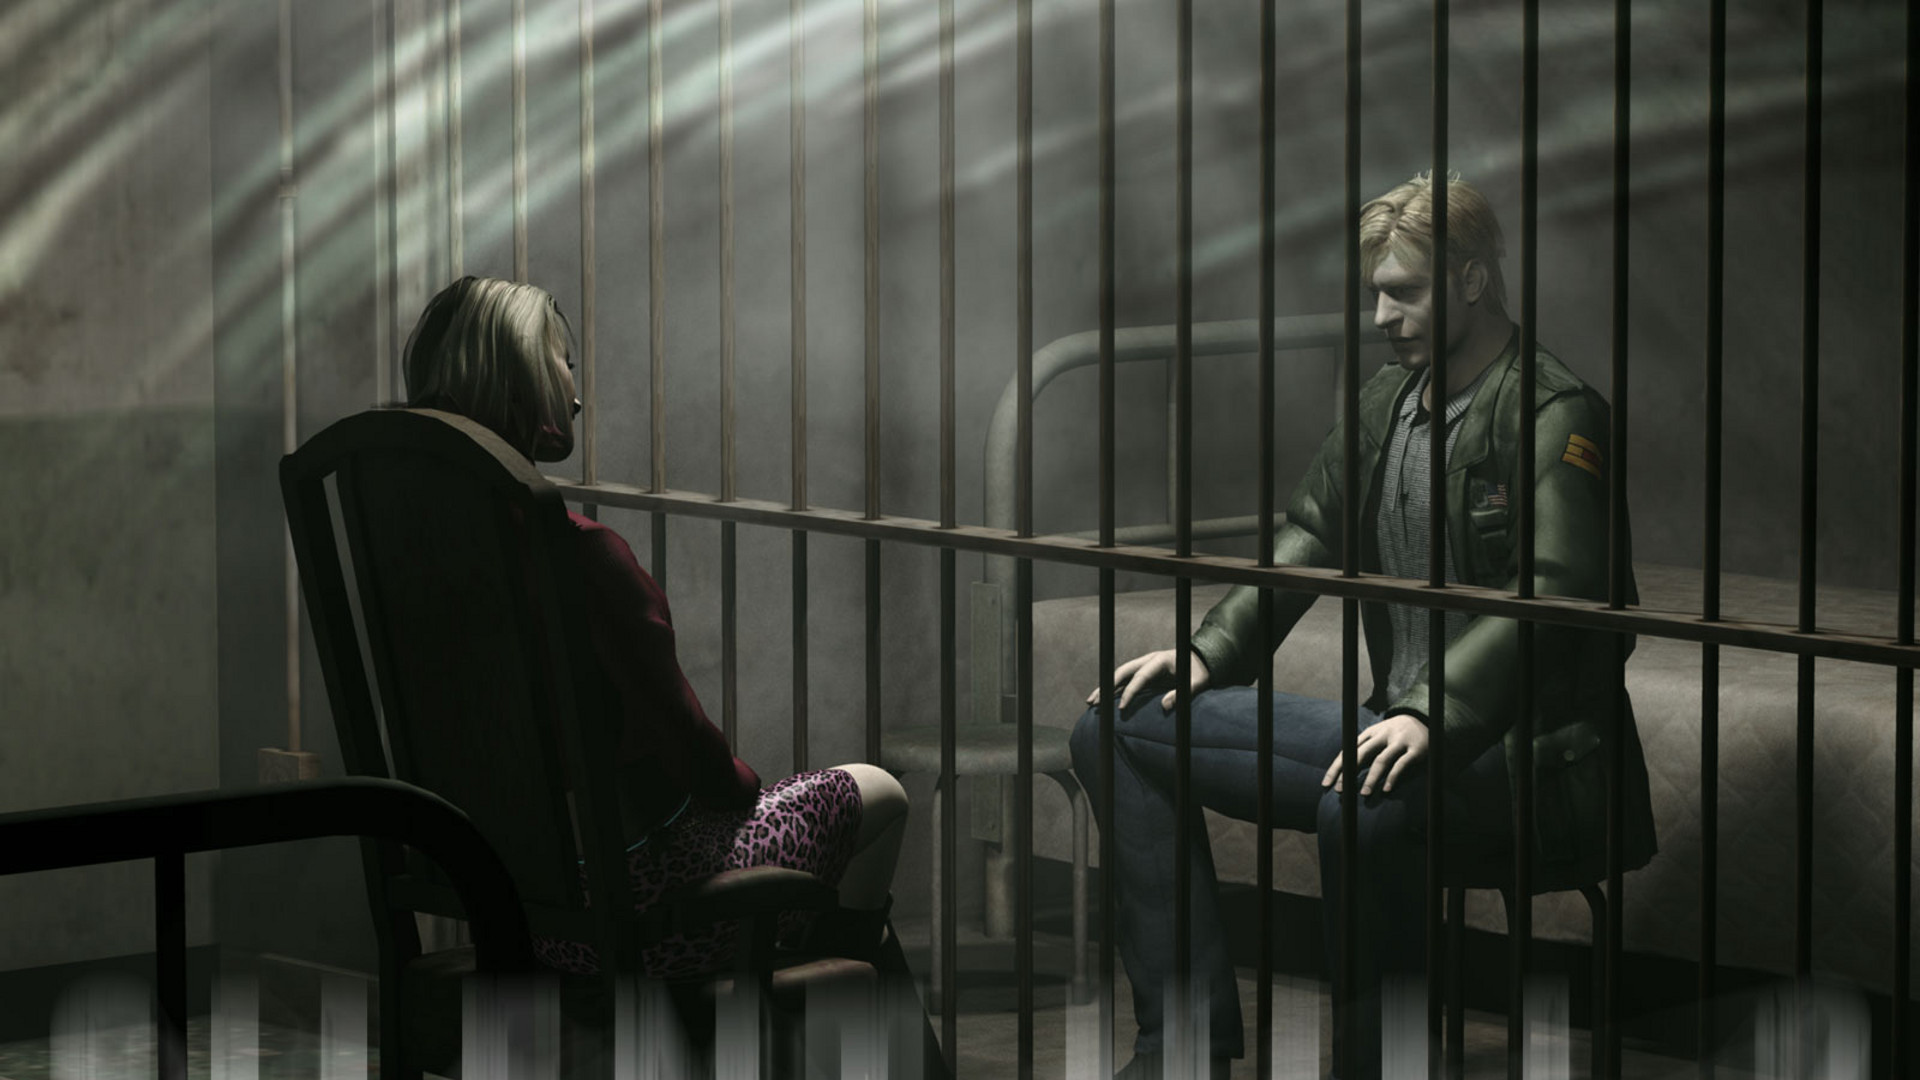 silent hill 2 pc download